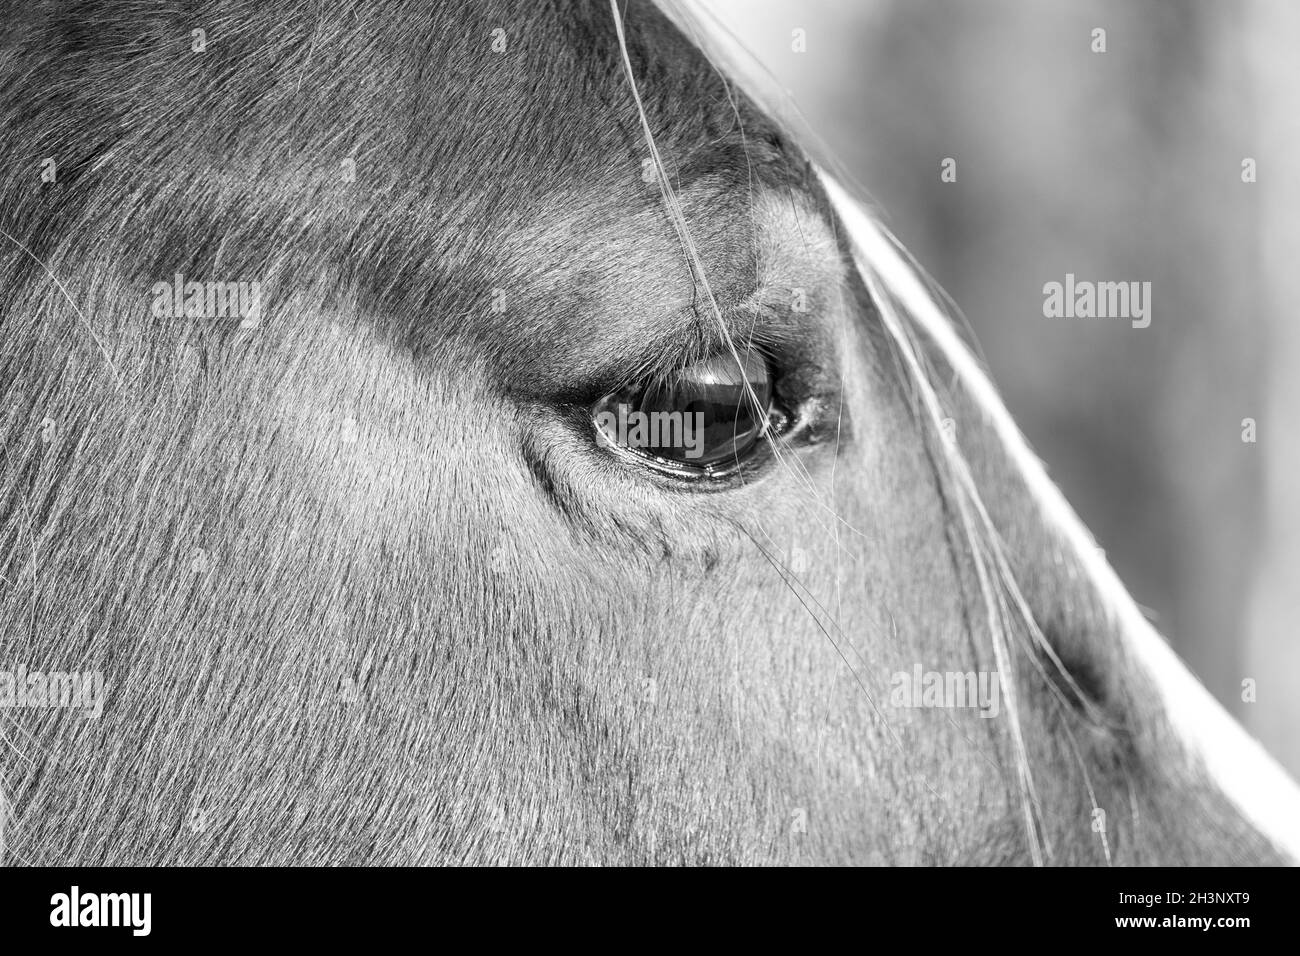 A Horse Portrait Focusing on a Single Brown Eye Stock Photo